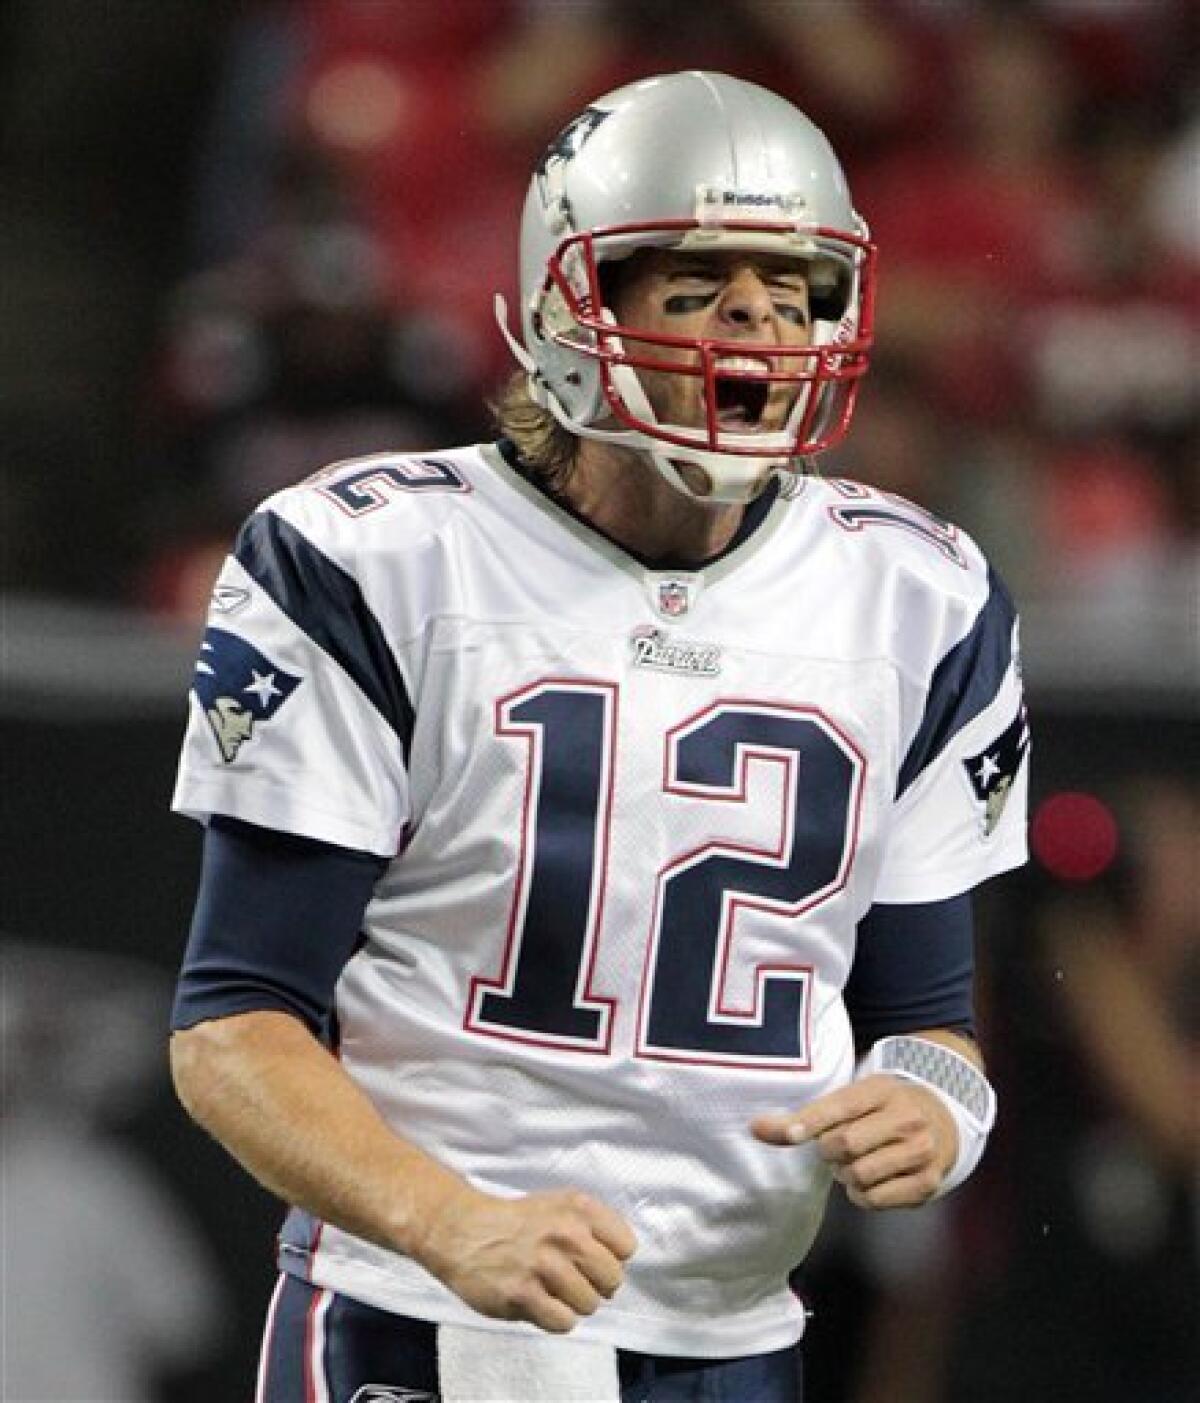 What The Hell Happened: Tom Brady Ends NFL Career After 23 Years